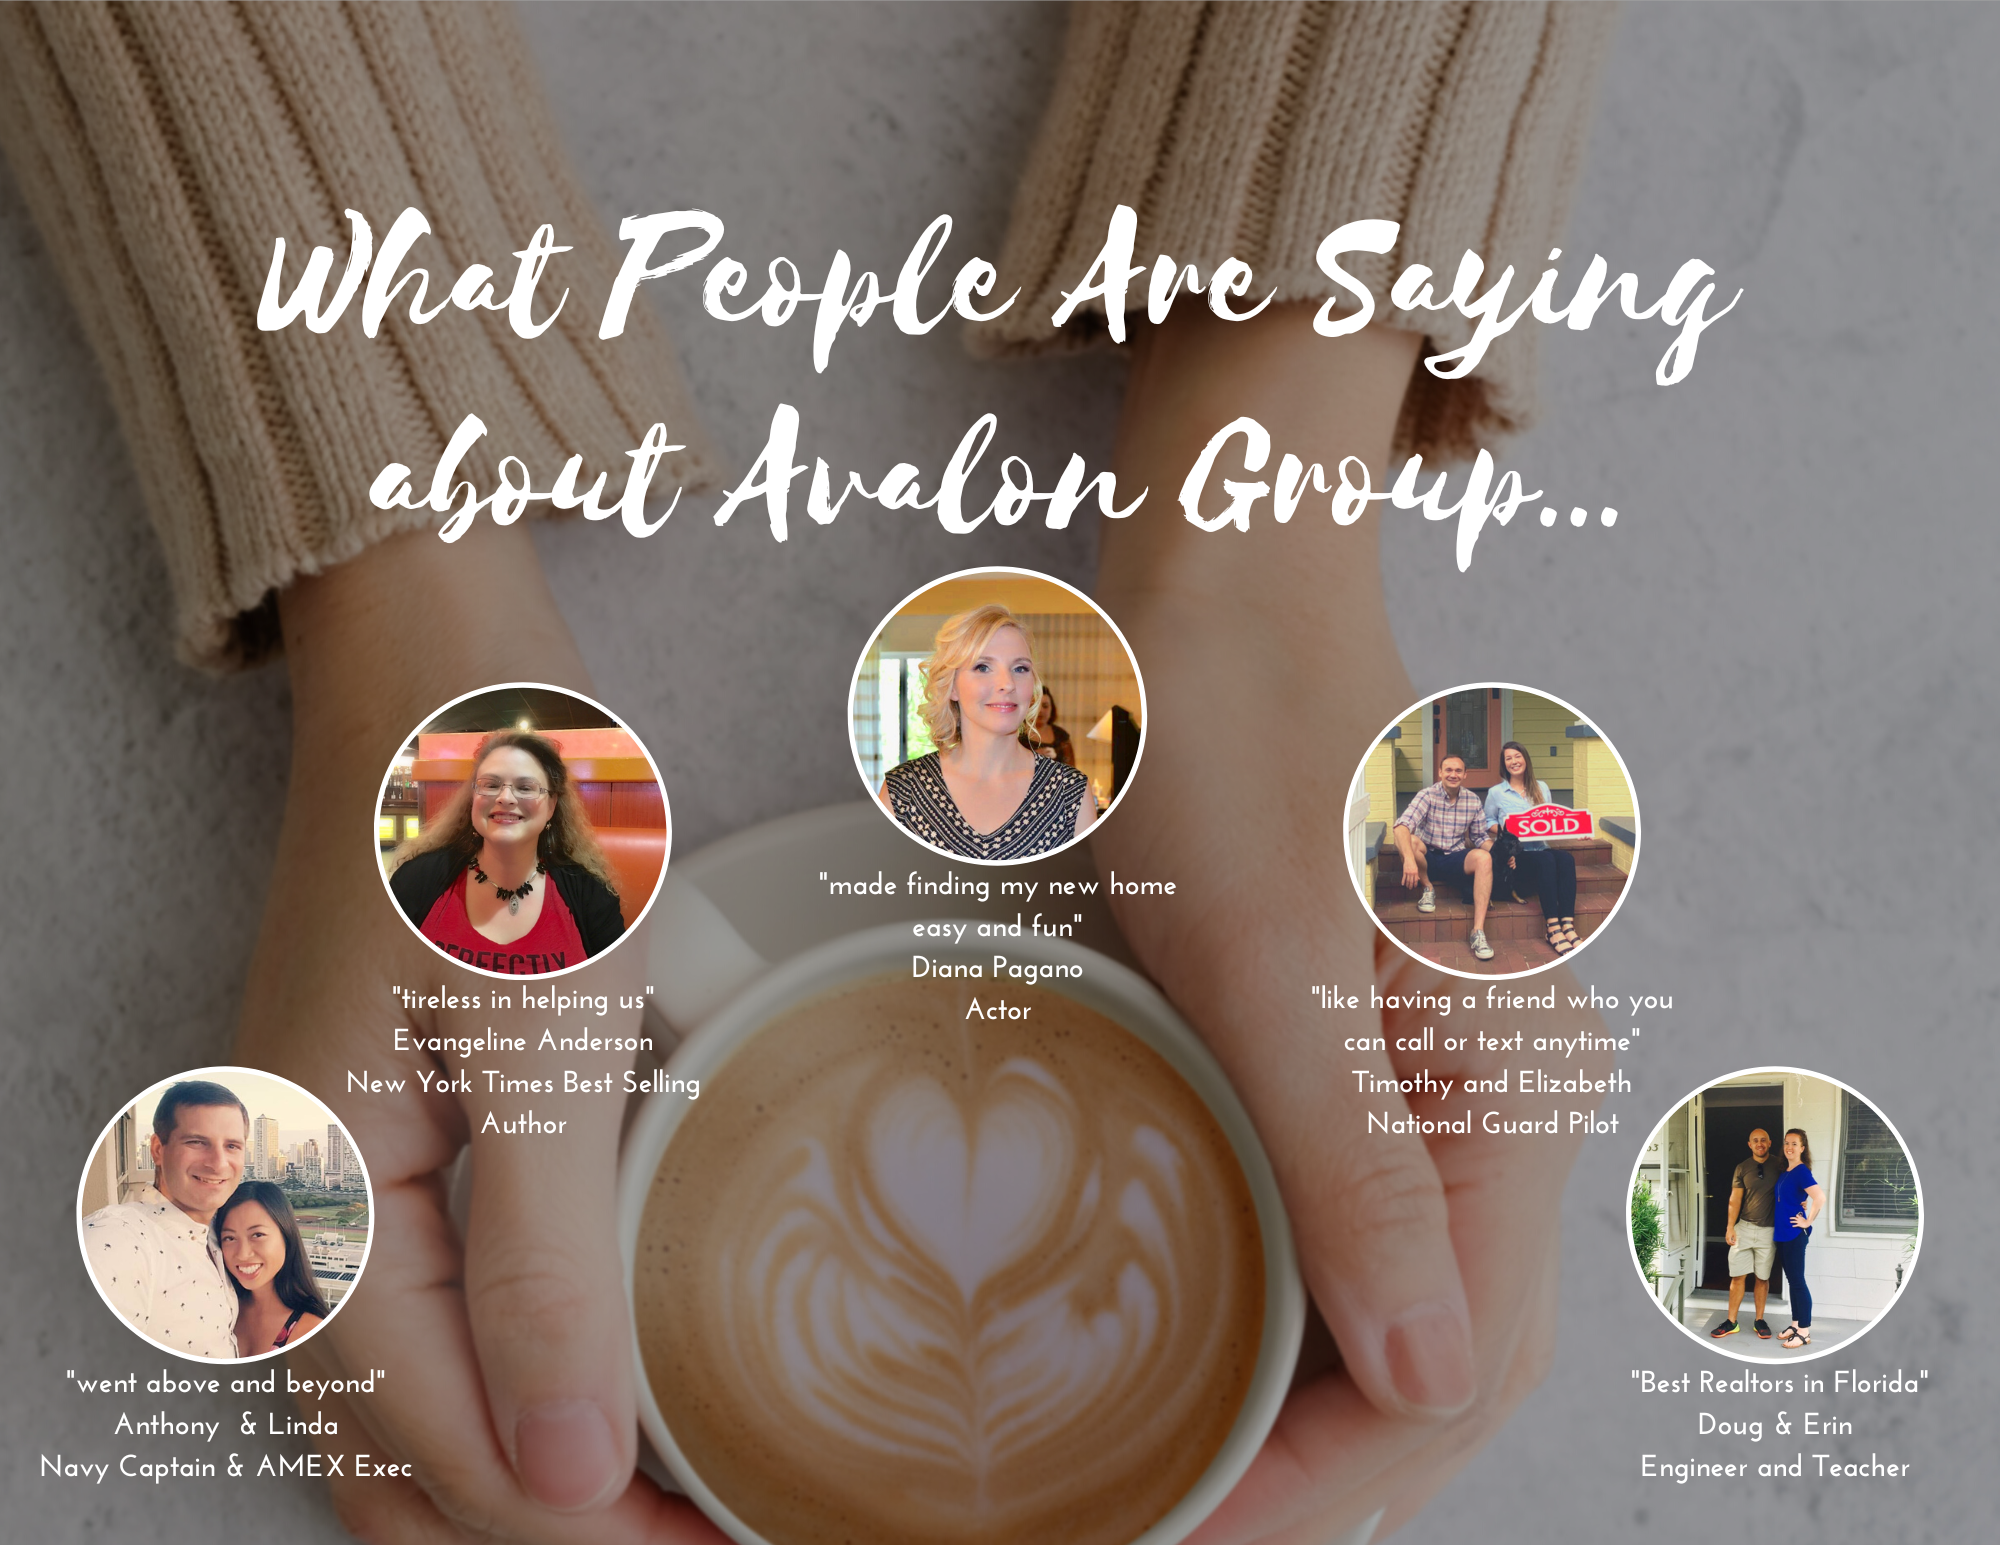 The picture shows pictures of 5 of our past clients with quotes that are from their five star review of Avalon Group.  In the background is a person holding a coffee cup with a heart in the middle of the cup.